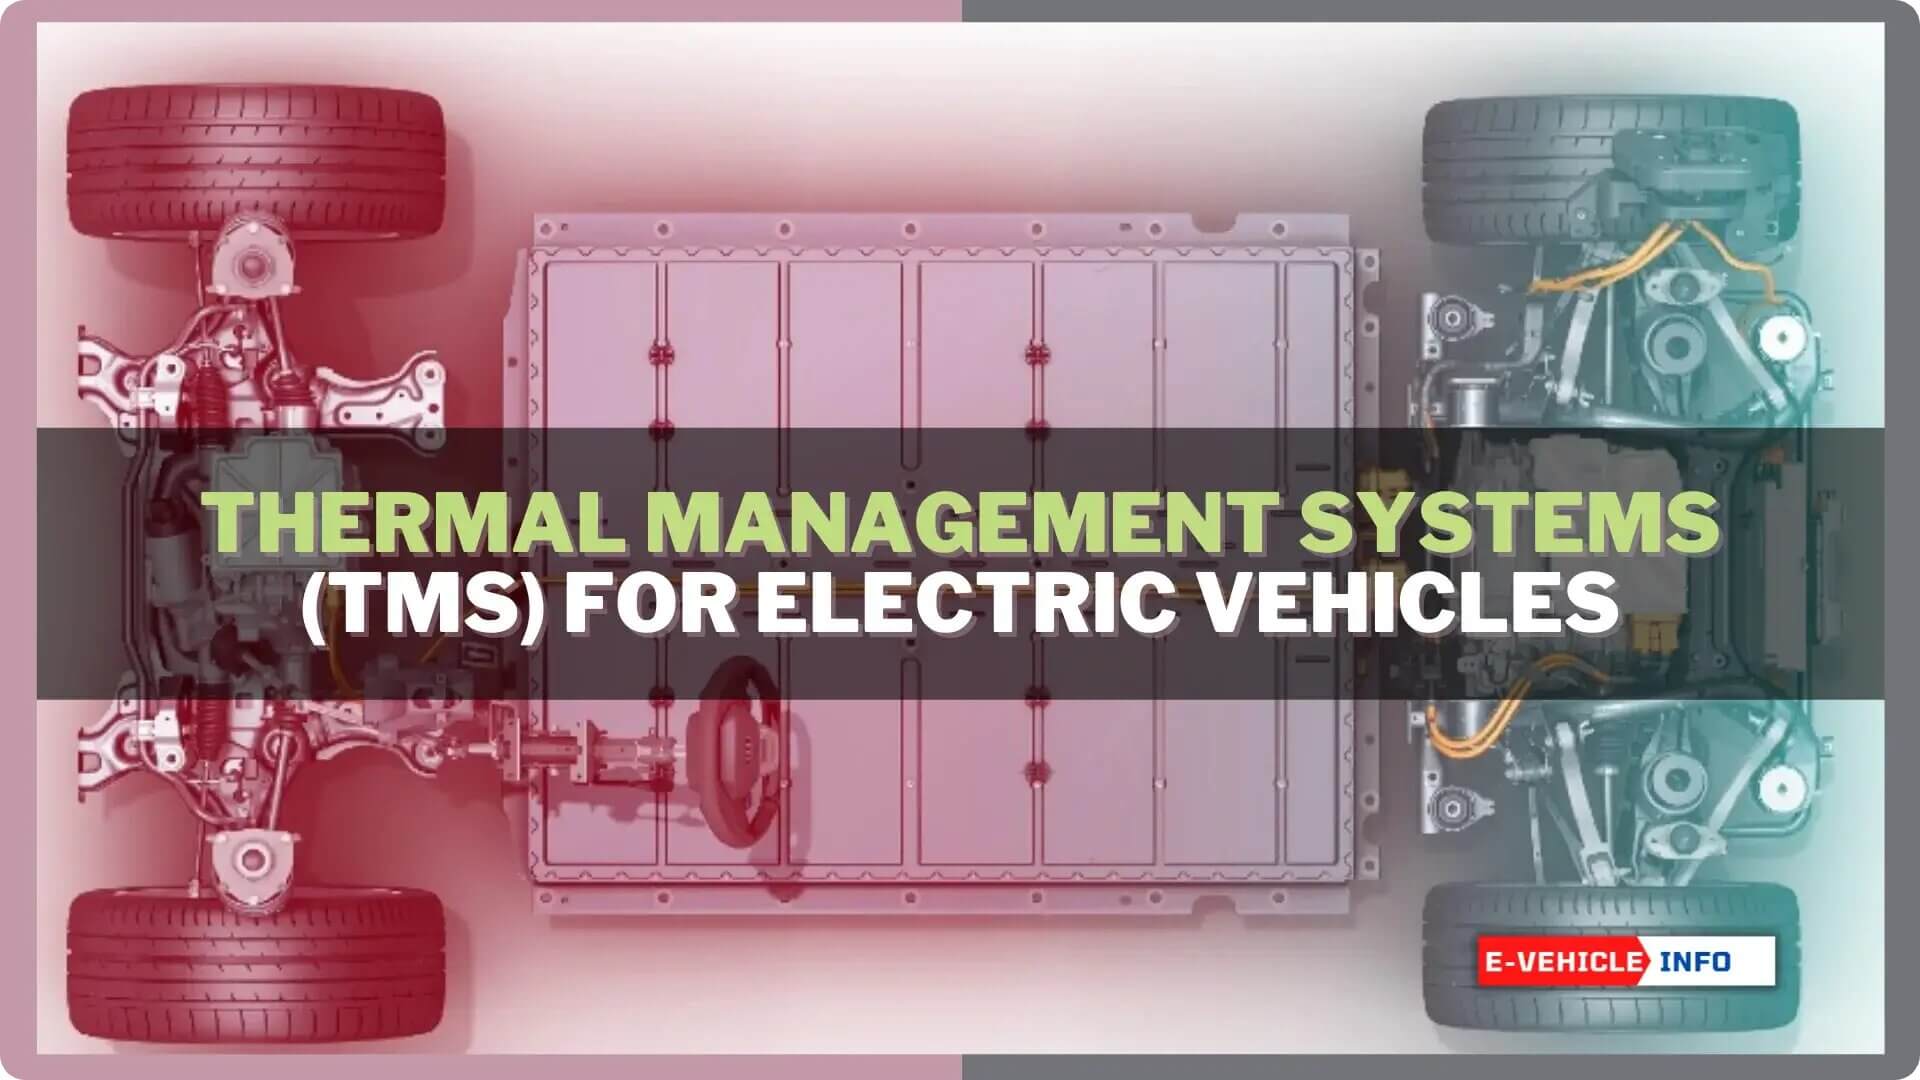 https://e-vehicleinfo.com/thermal-management-systems-tms-for-electric-vehicles/